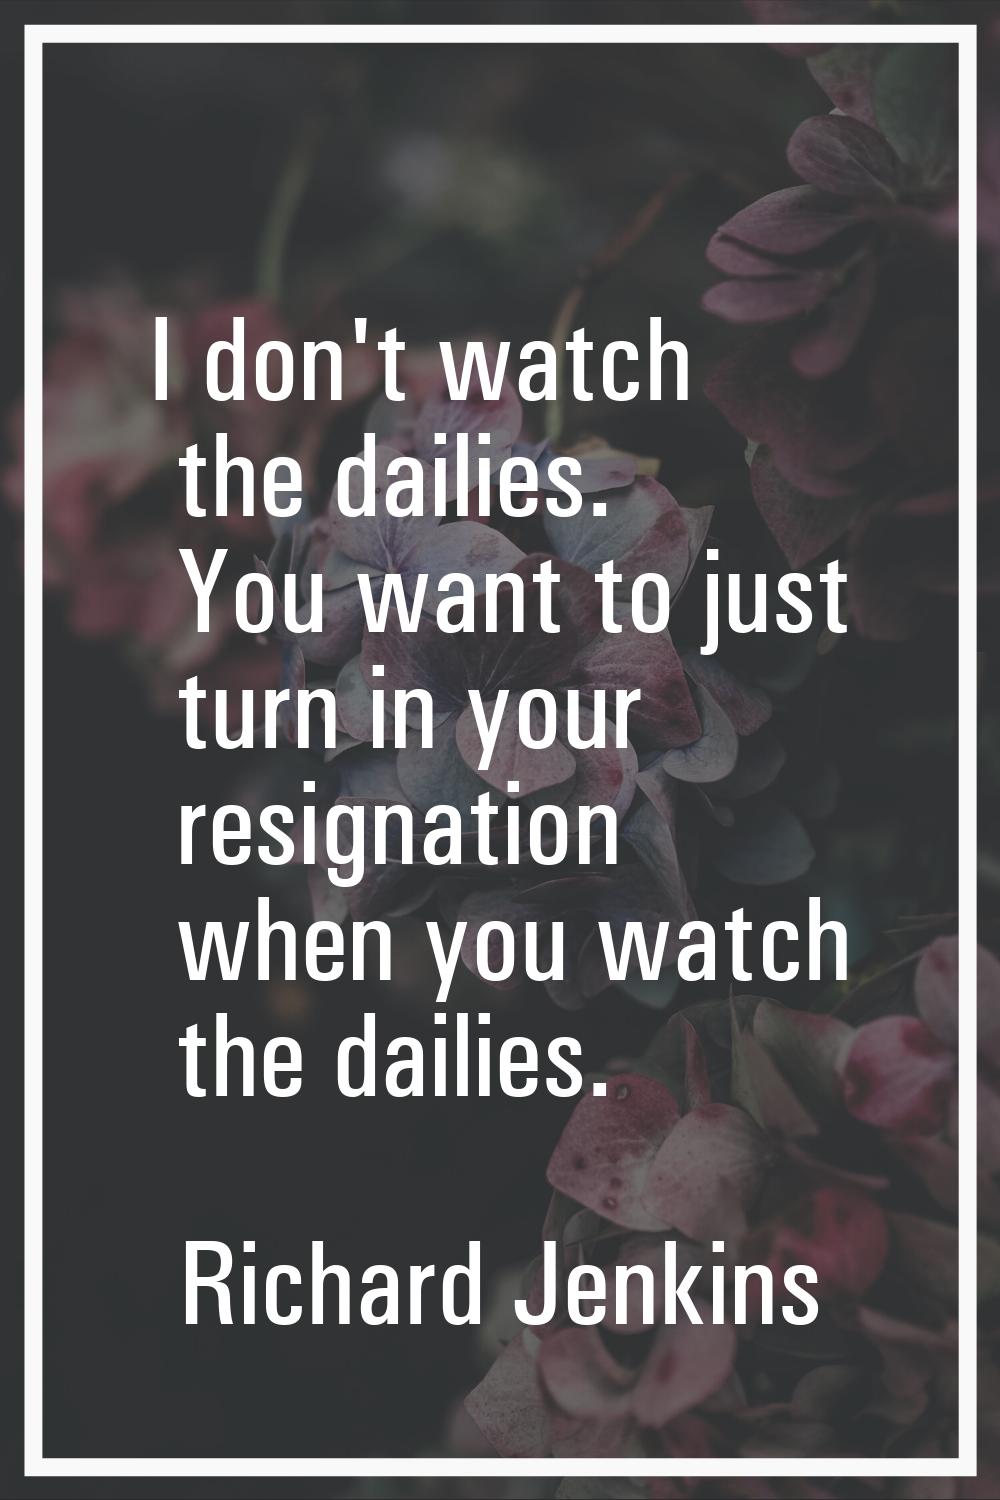 I don't watch the dailies. You want to just turn in your resignation when you watch the dailies.